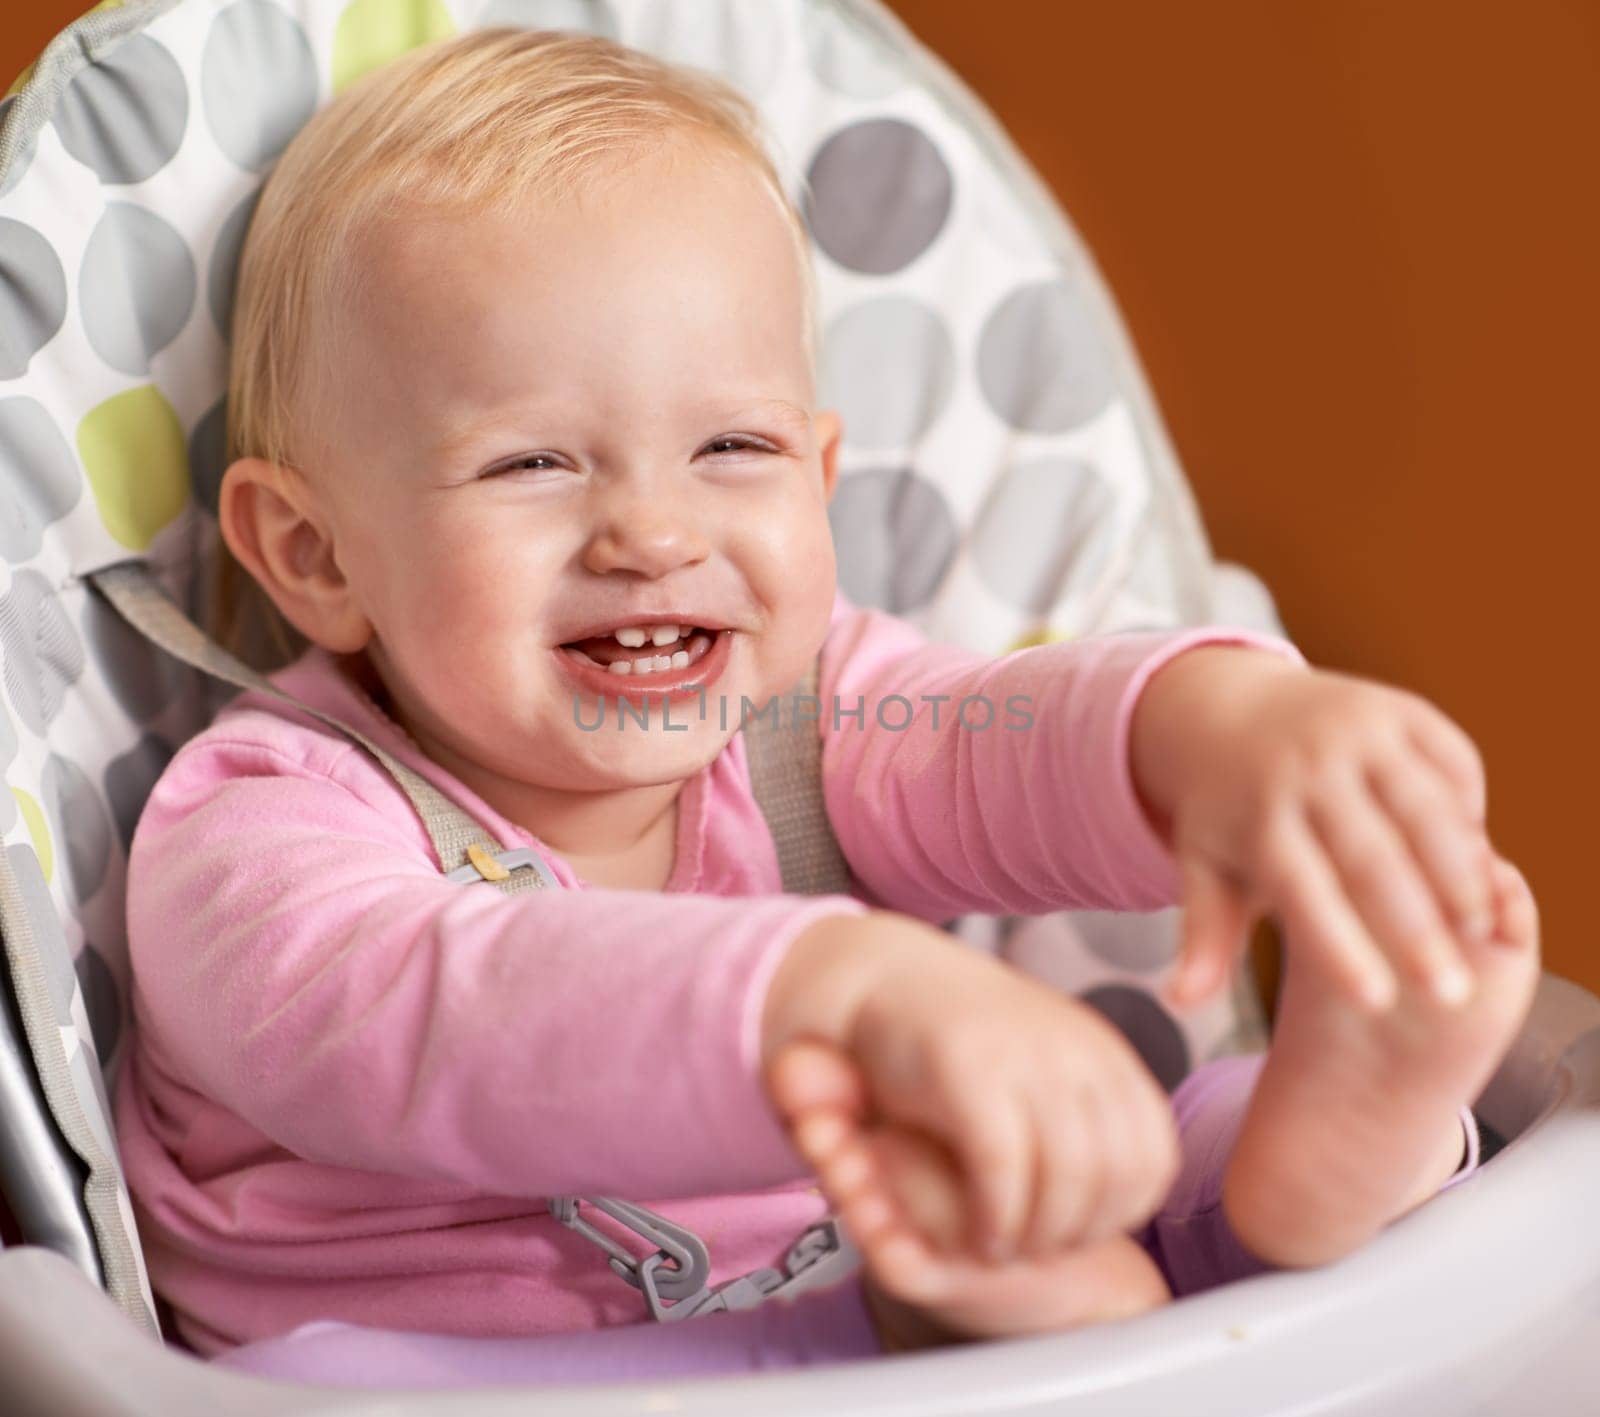 Happy, baby and laughing in high chair at home in the morning ready for eating food. Youth, funny and smile of a infant with development and laughter in a house with feet playing and joy of a child.